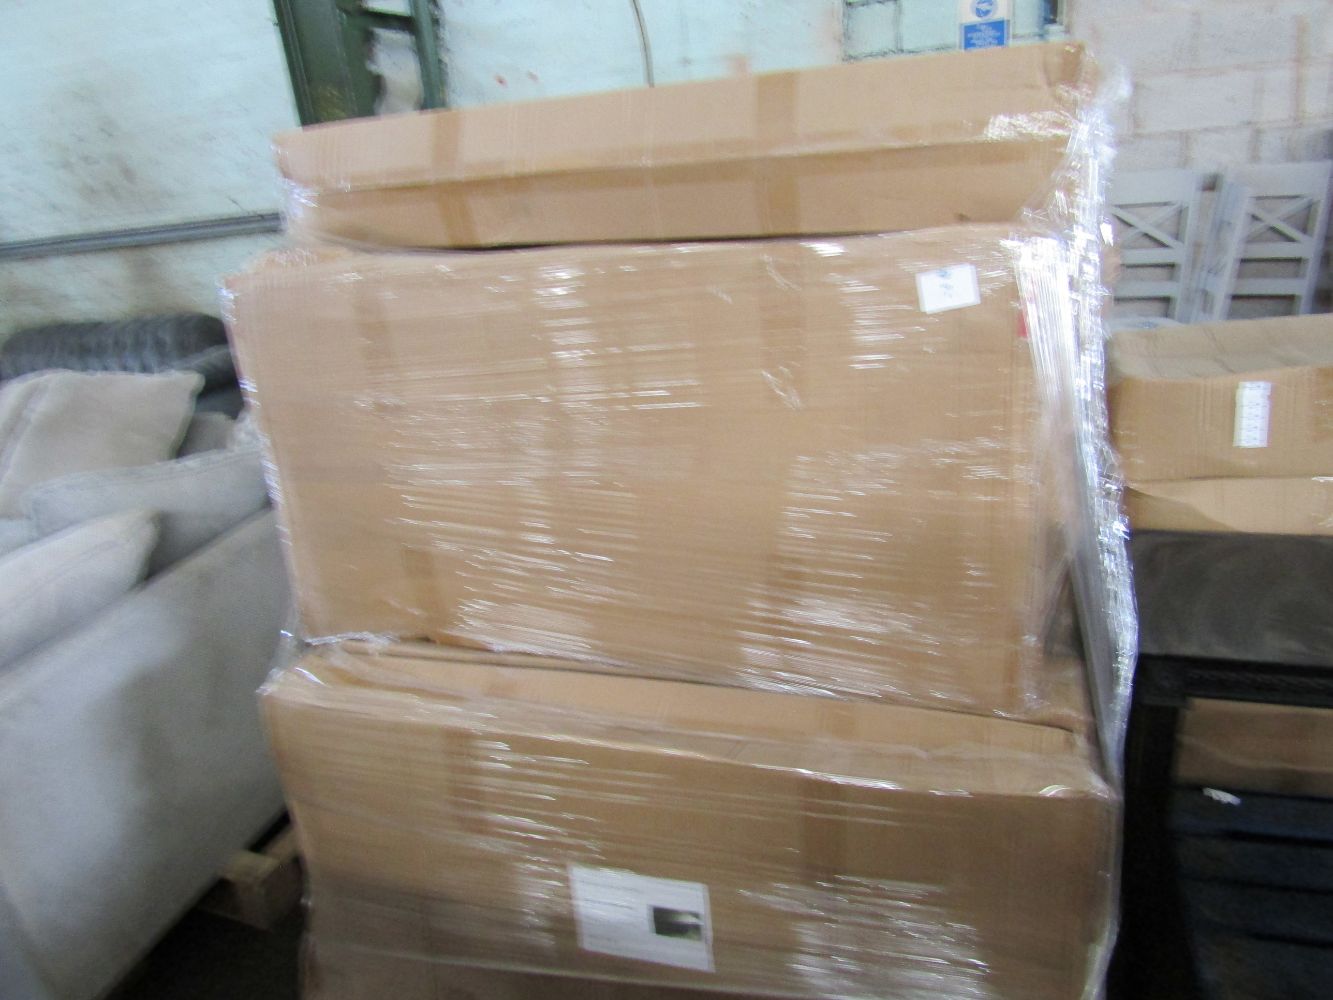 one lot of 6 pallets of  new Furniture from Bradshaw's with a 4% of RRP starting bid